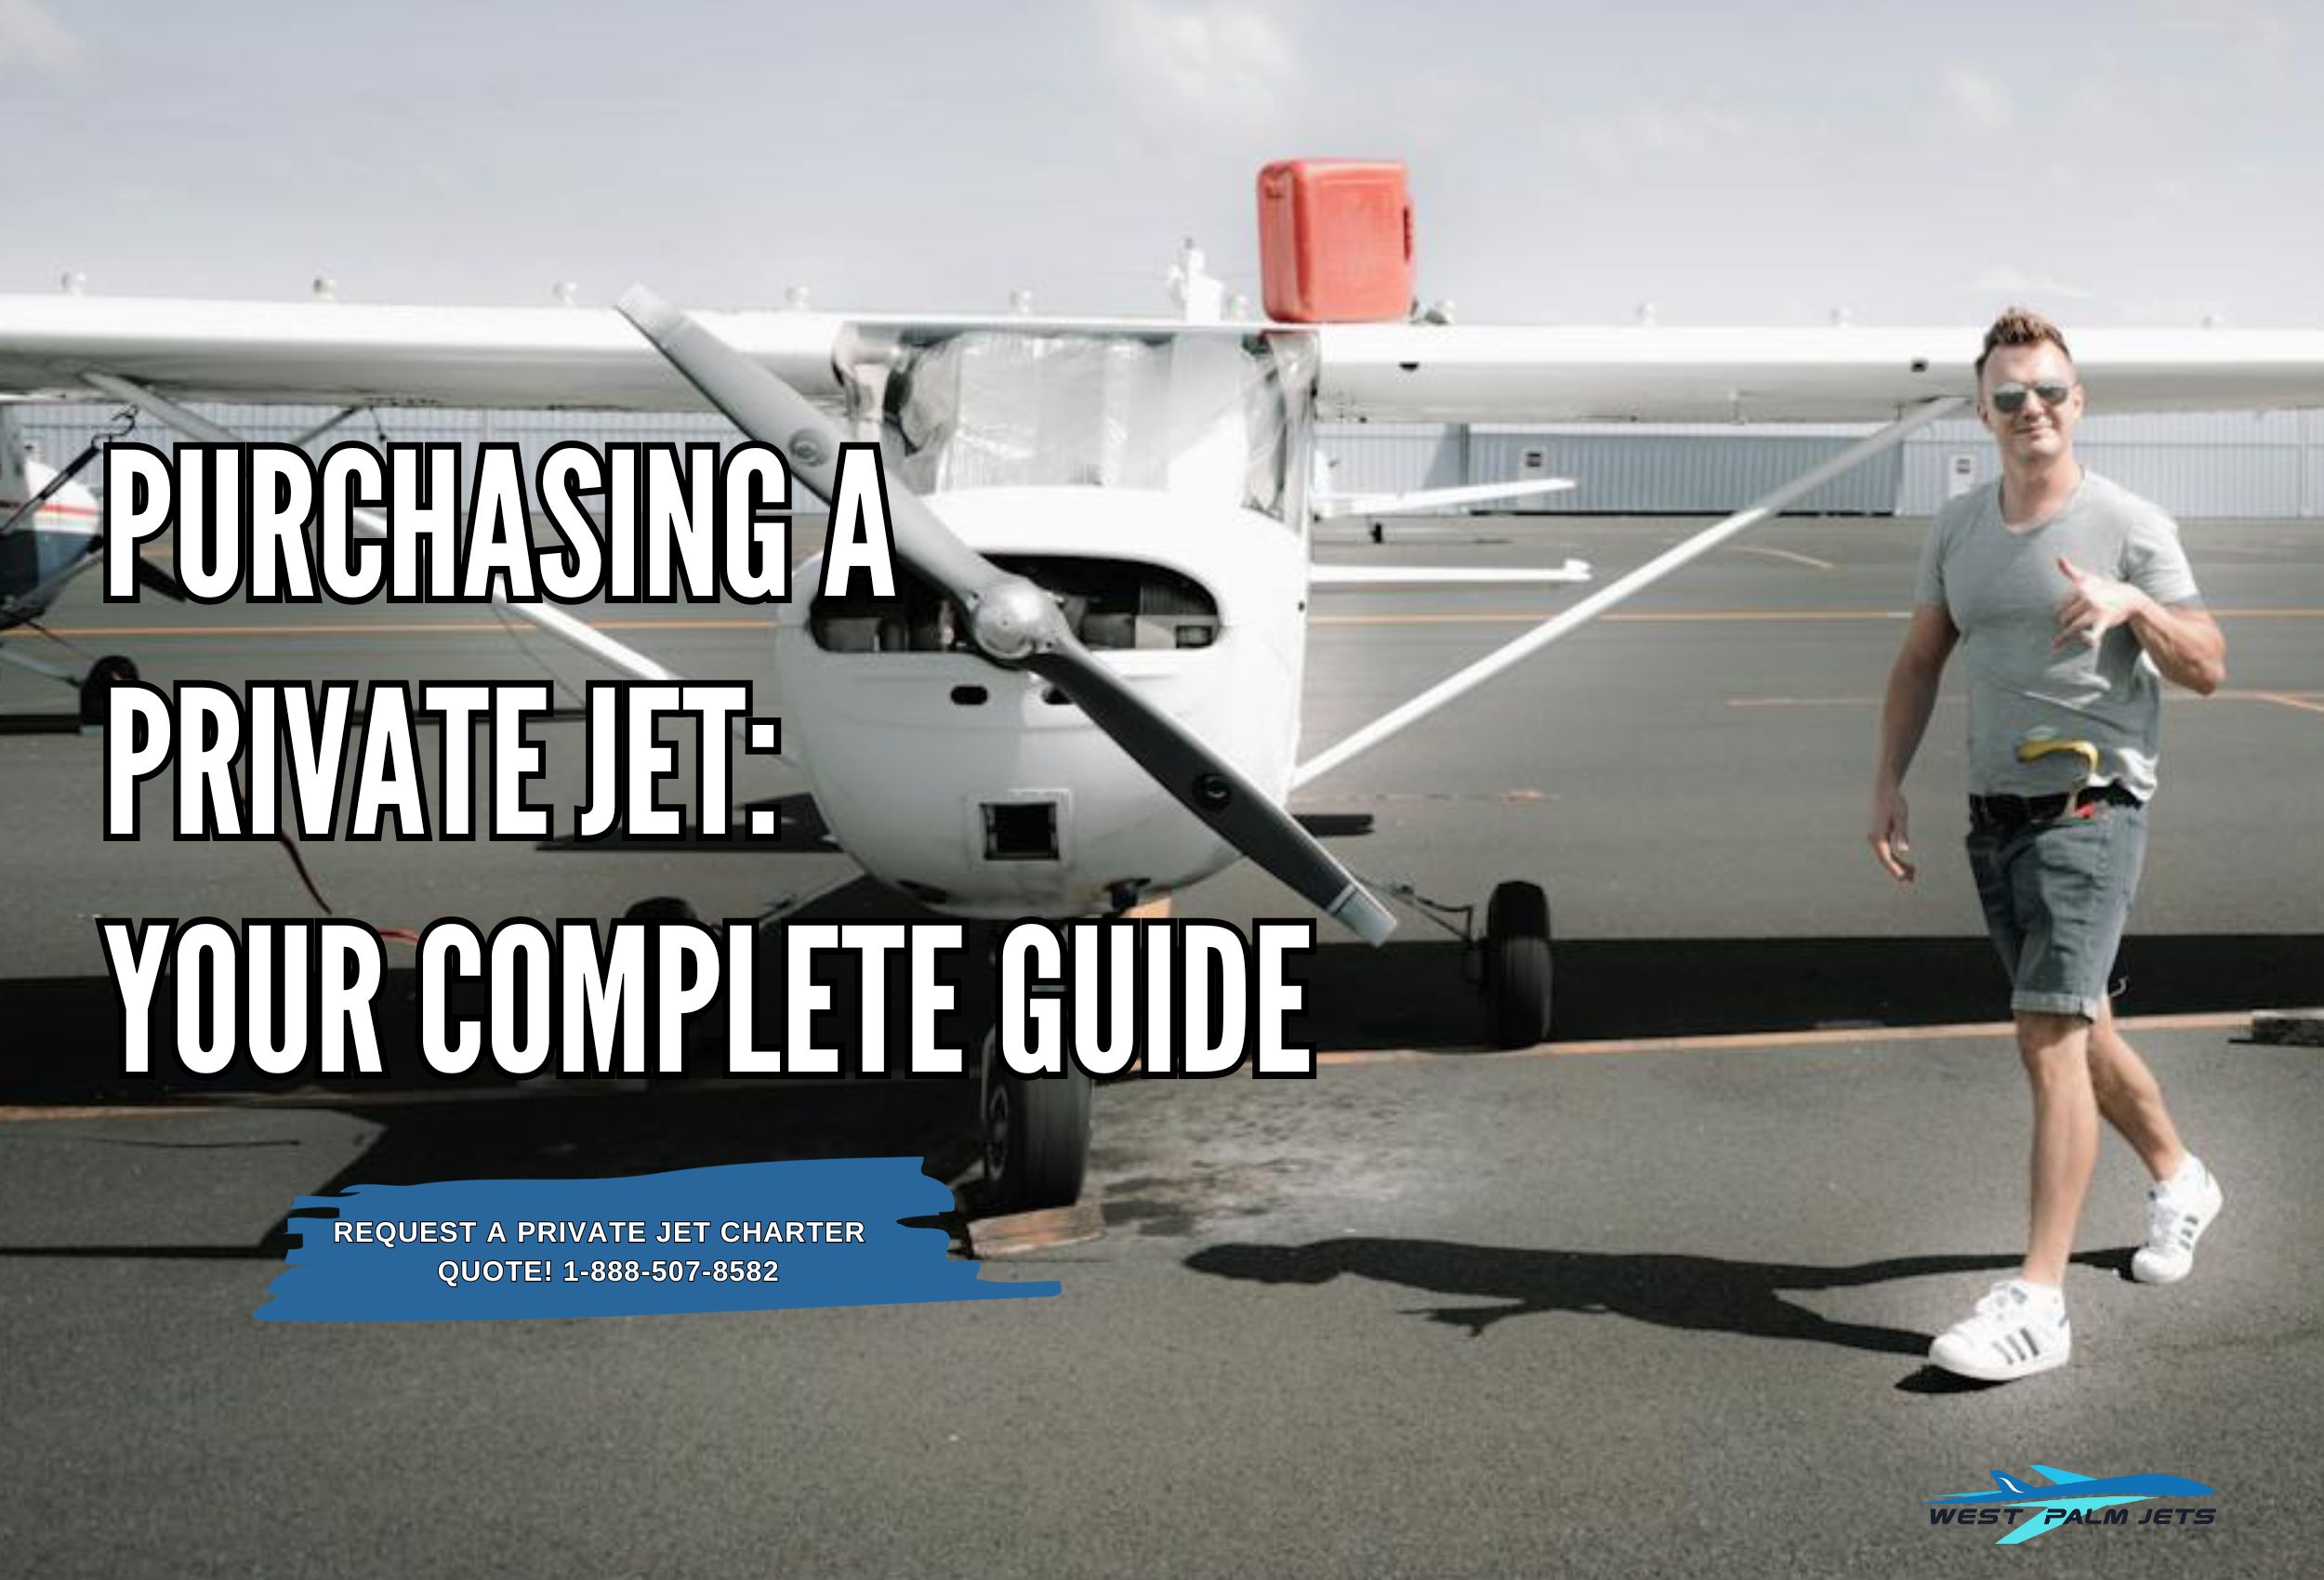 Purchasing a Private Jet Your Complete Guide (1)